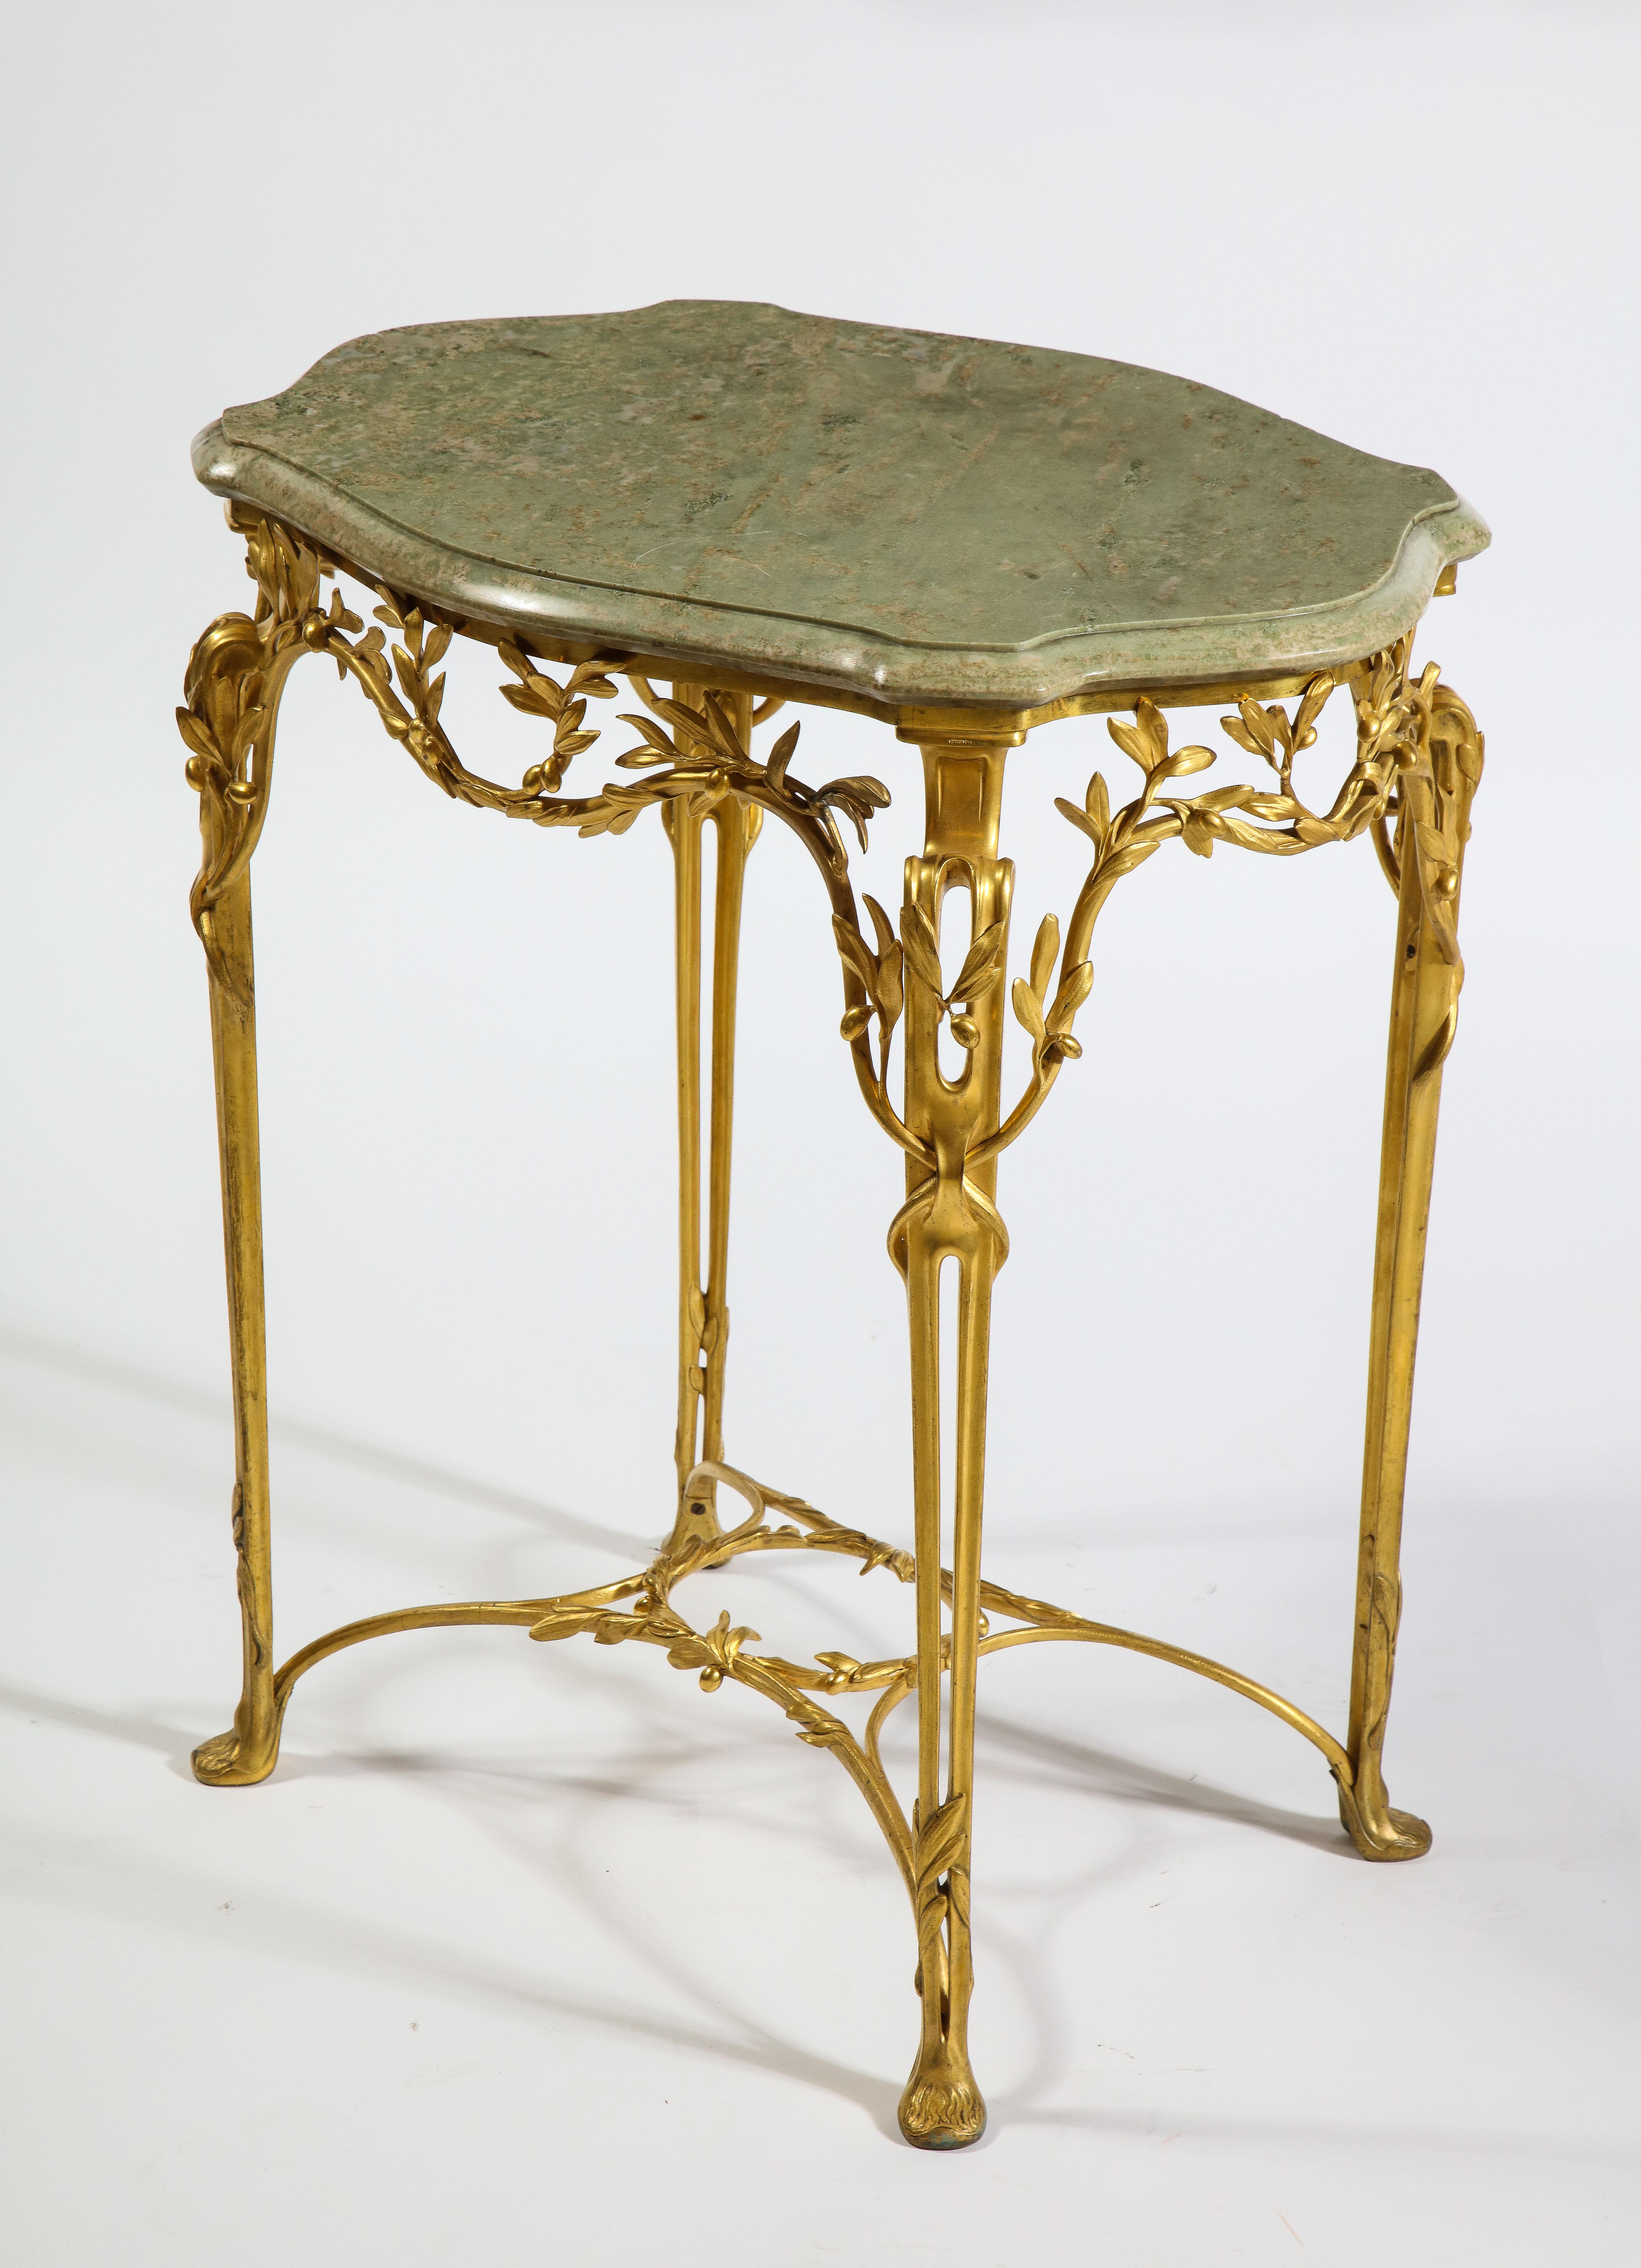 Art Nouveau Center Table by Tiffany and Co., Dore Bronze and Marble Top, Signed, Early 1900s For Sale